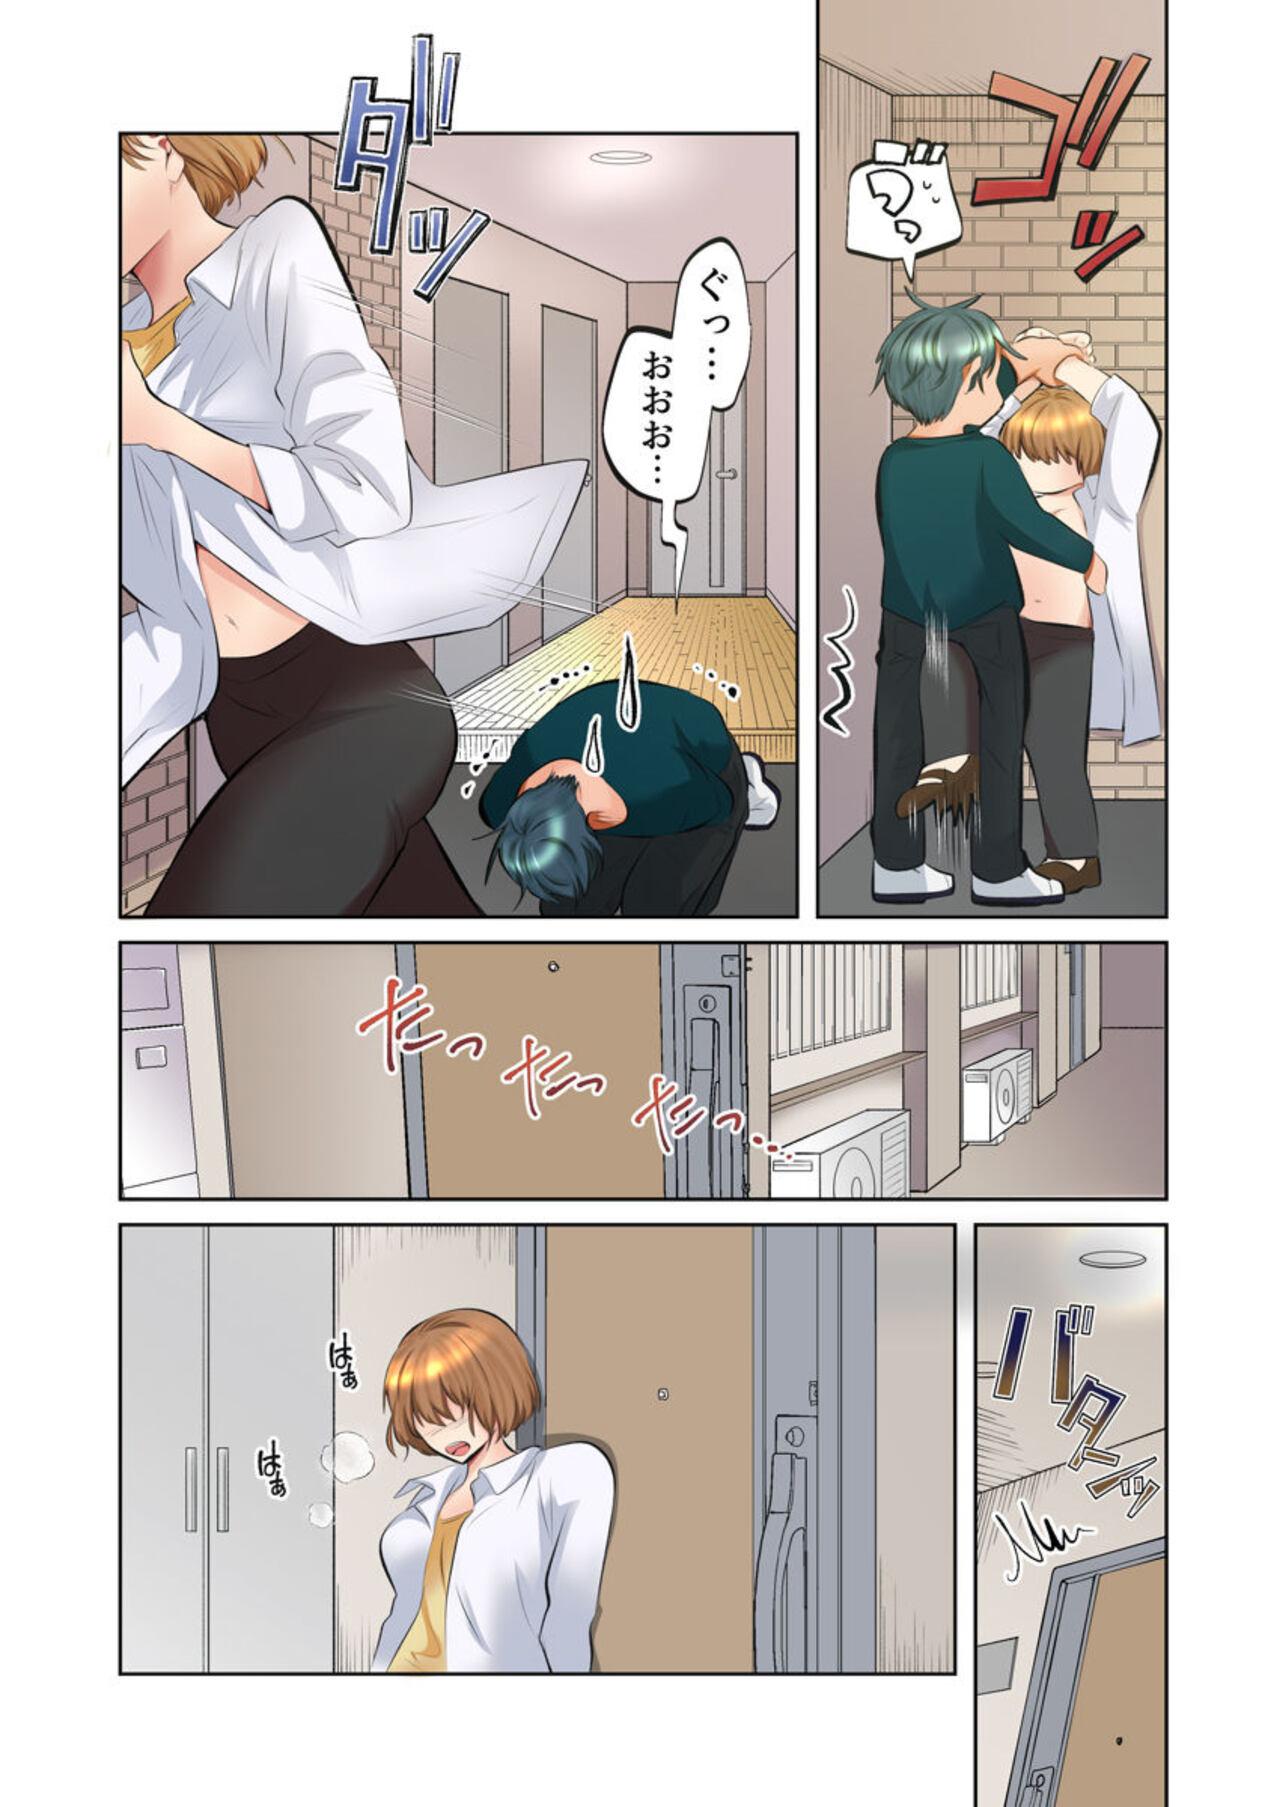 Ball Busting [Ika Hotaru] My Neighbor Is A Sadistic Ex-Boyfriend ~I Love My Husband, But My Aching Body Has Been Redeveloped~ (Full Color) 2 Australian - Page 8